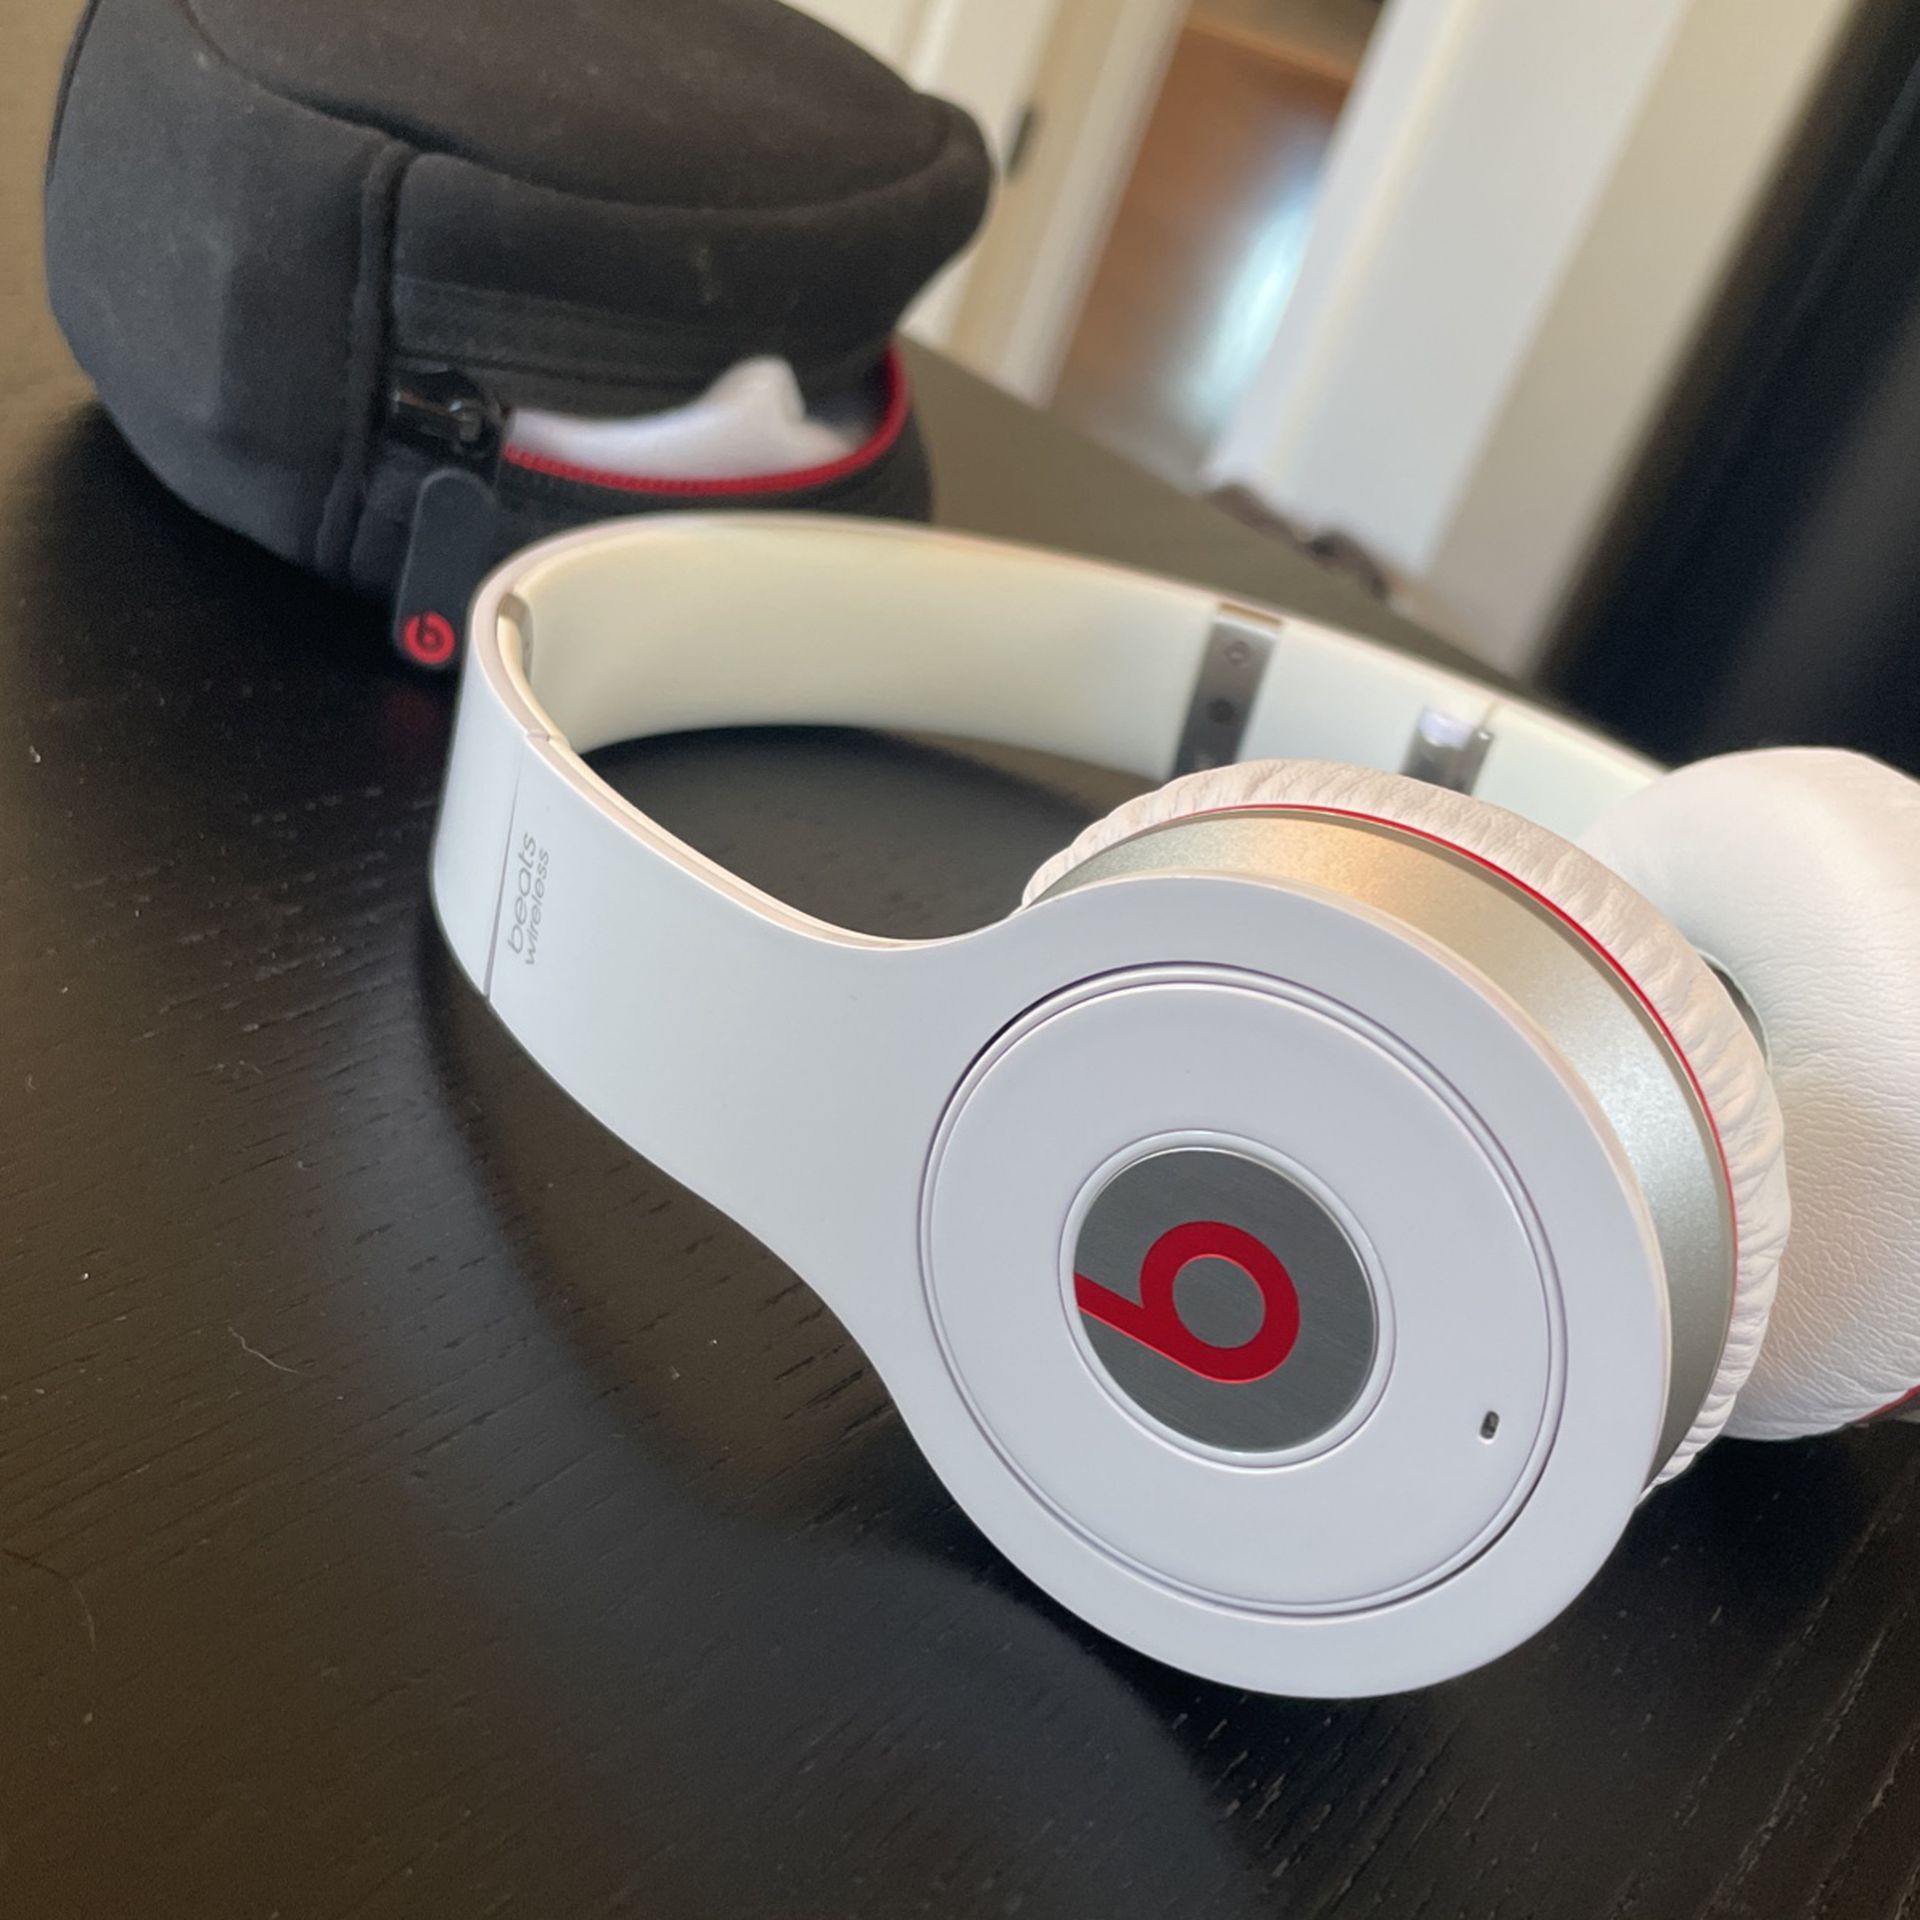 Beats by Dr. Dre Wireless Headphone White (contact info removed)2-01 Bluetooth Headphones